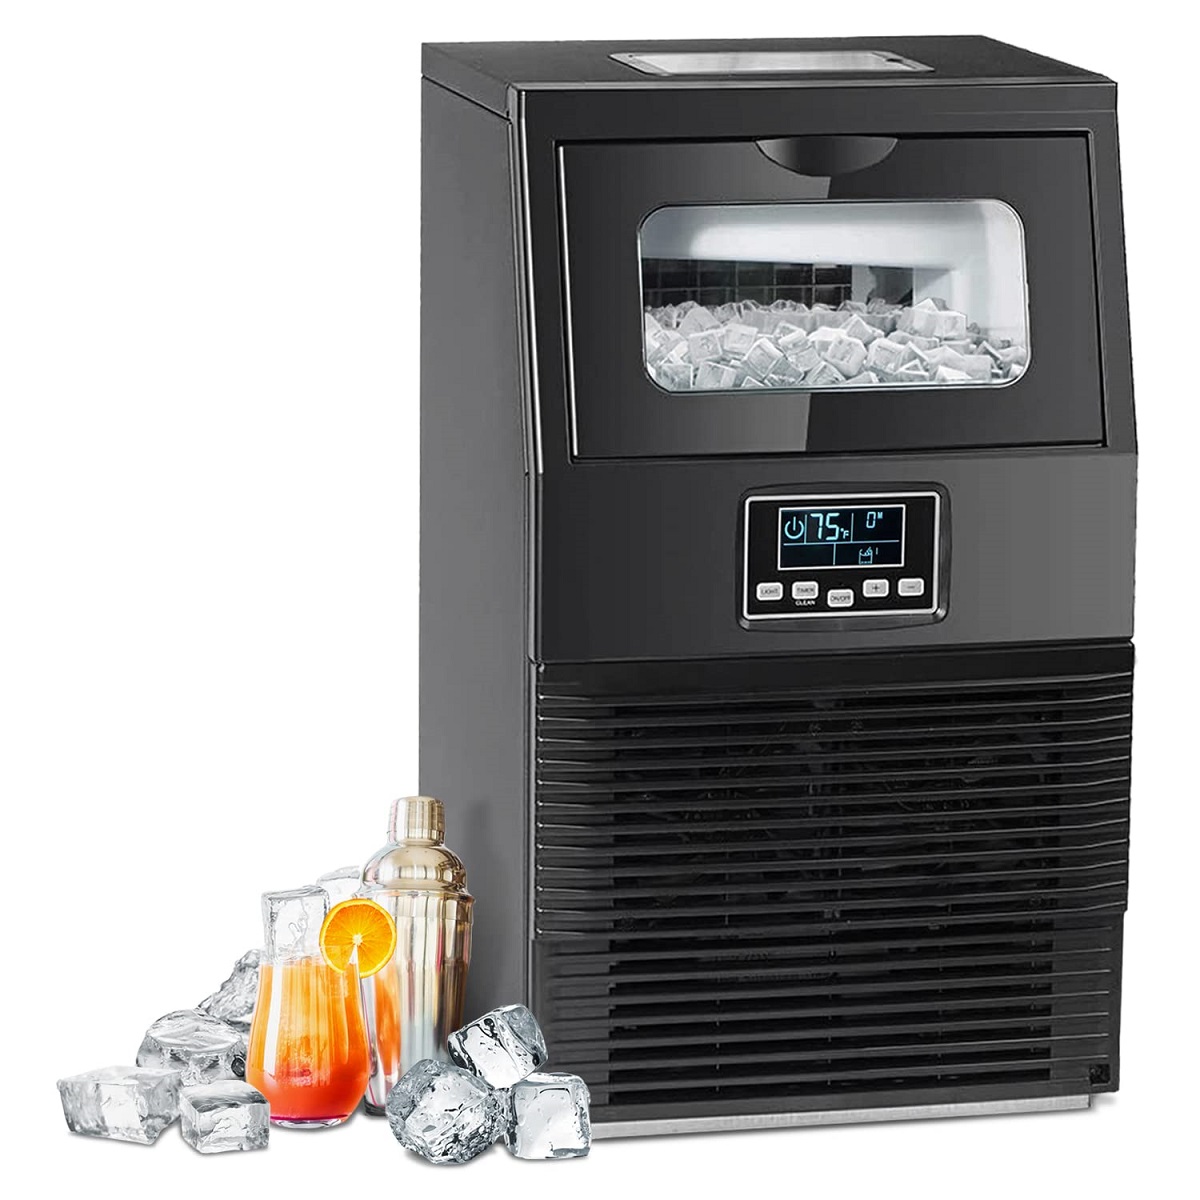 Which Type Of Ice Maker Has A Continuous Harvest Cycle?